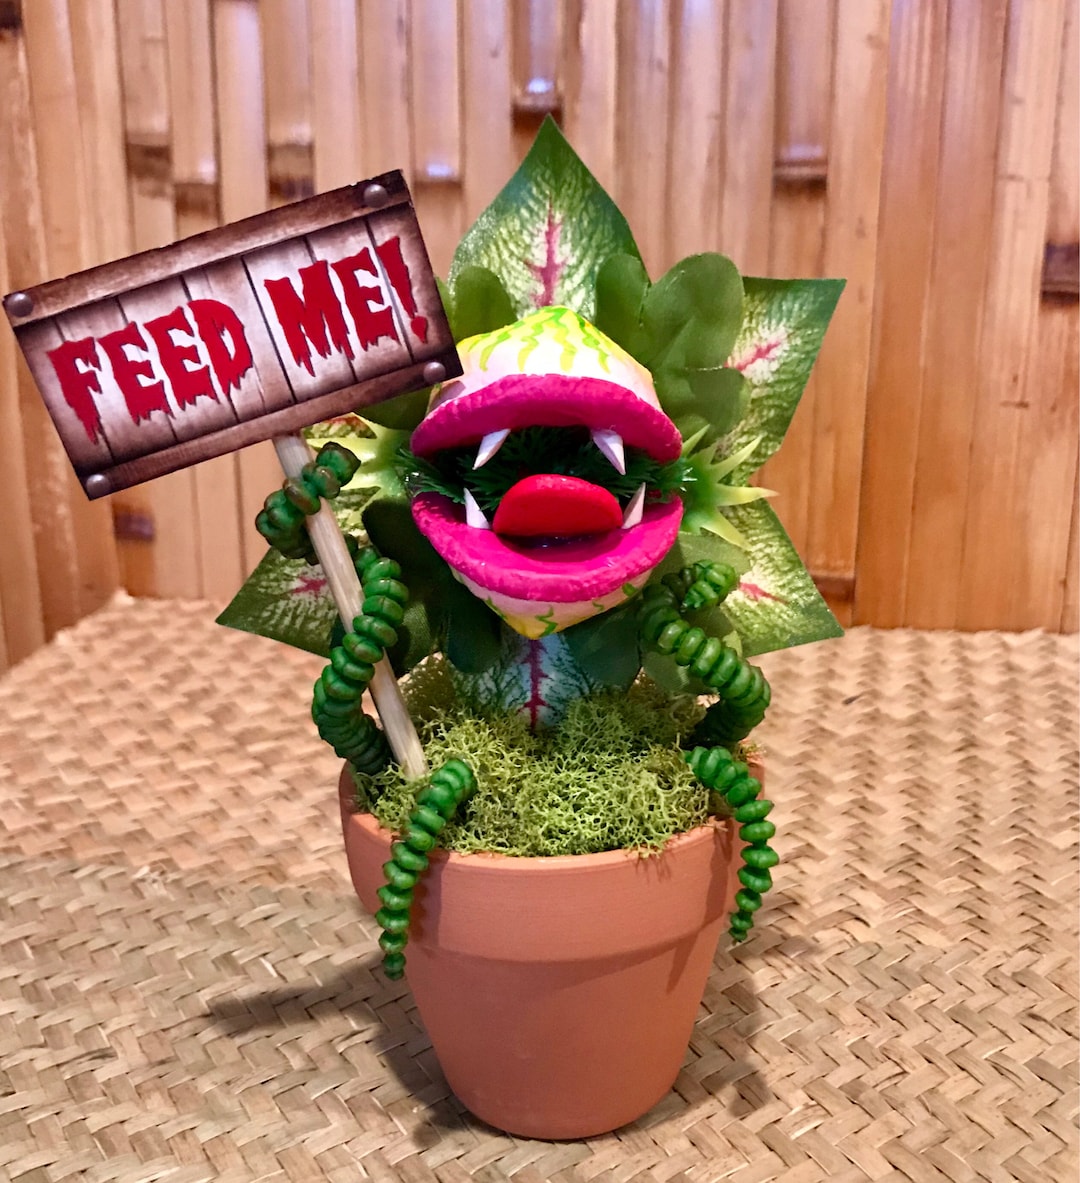 I made an Audrey2 from Little shop of Horrors using styrofoam eggs